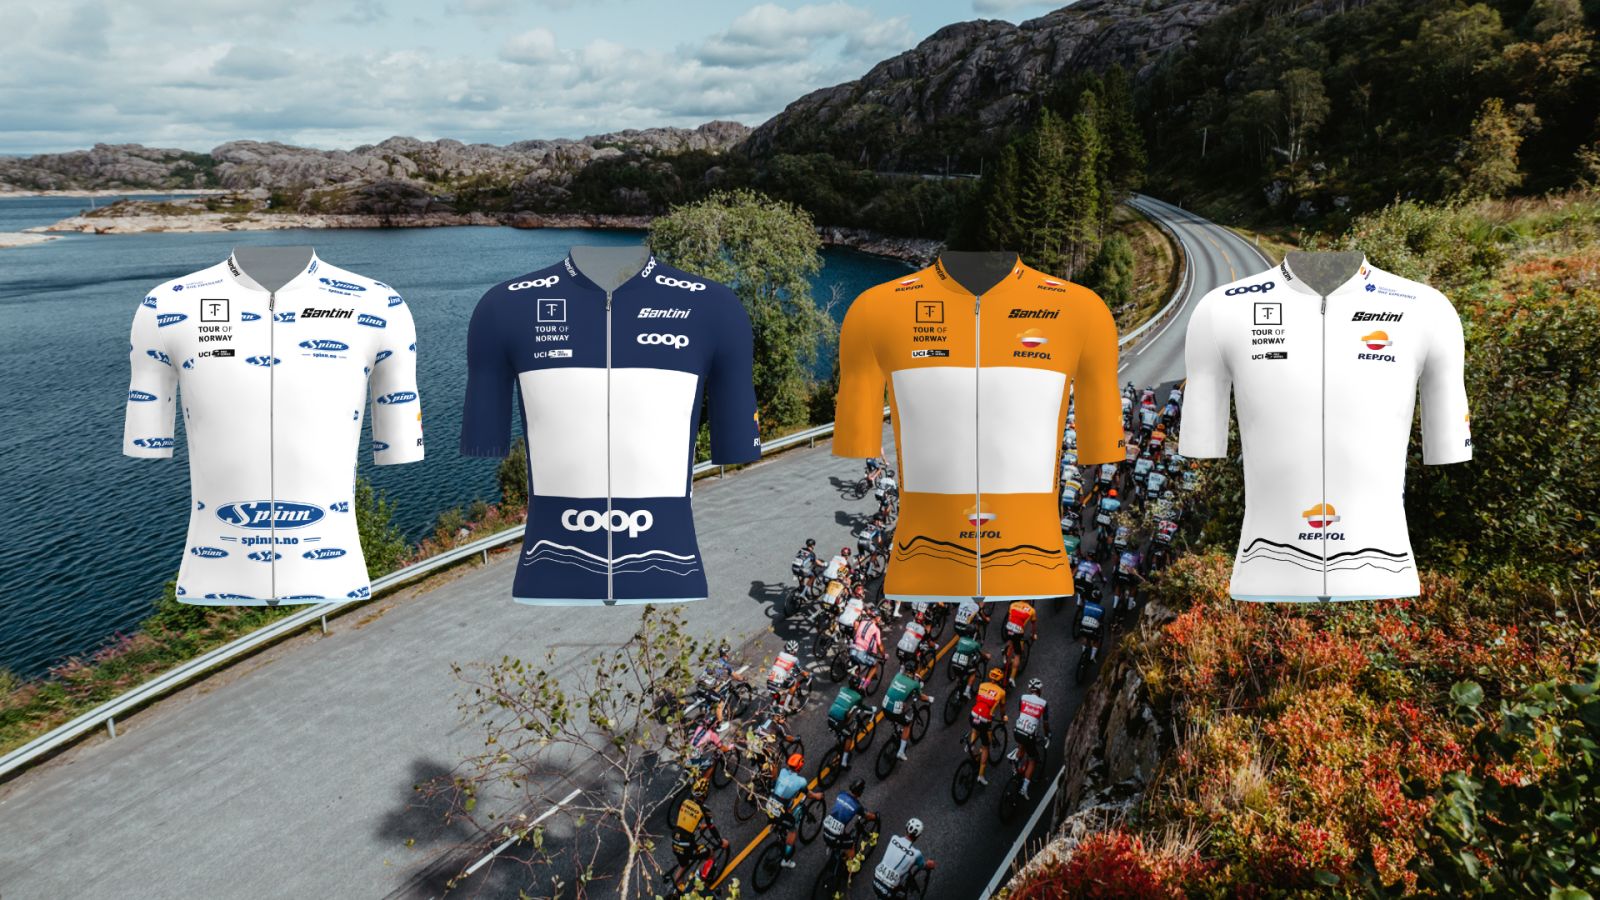 Here is the leader jerseys for Tour of Norway 2022